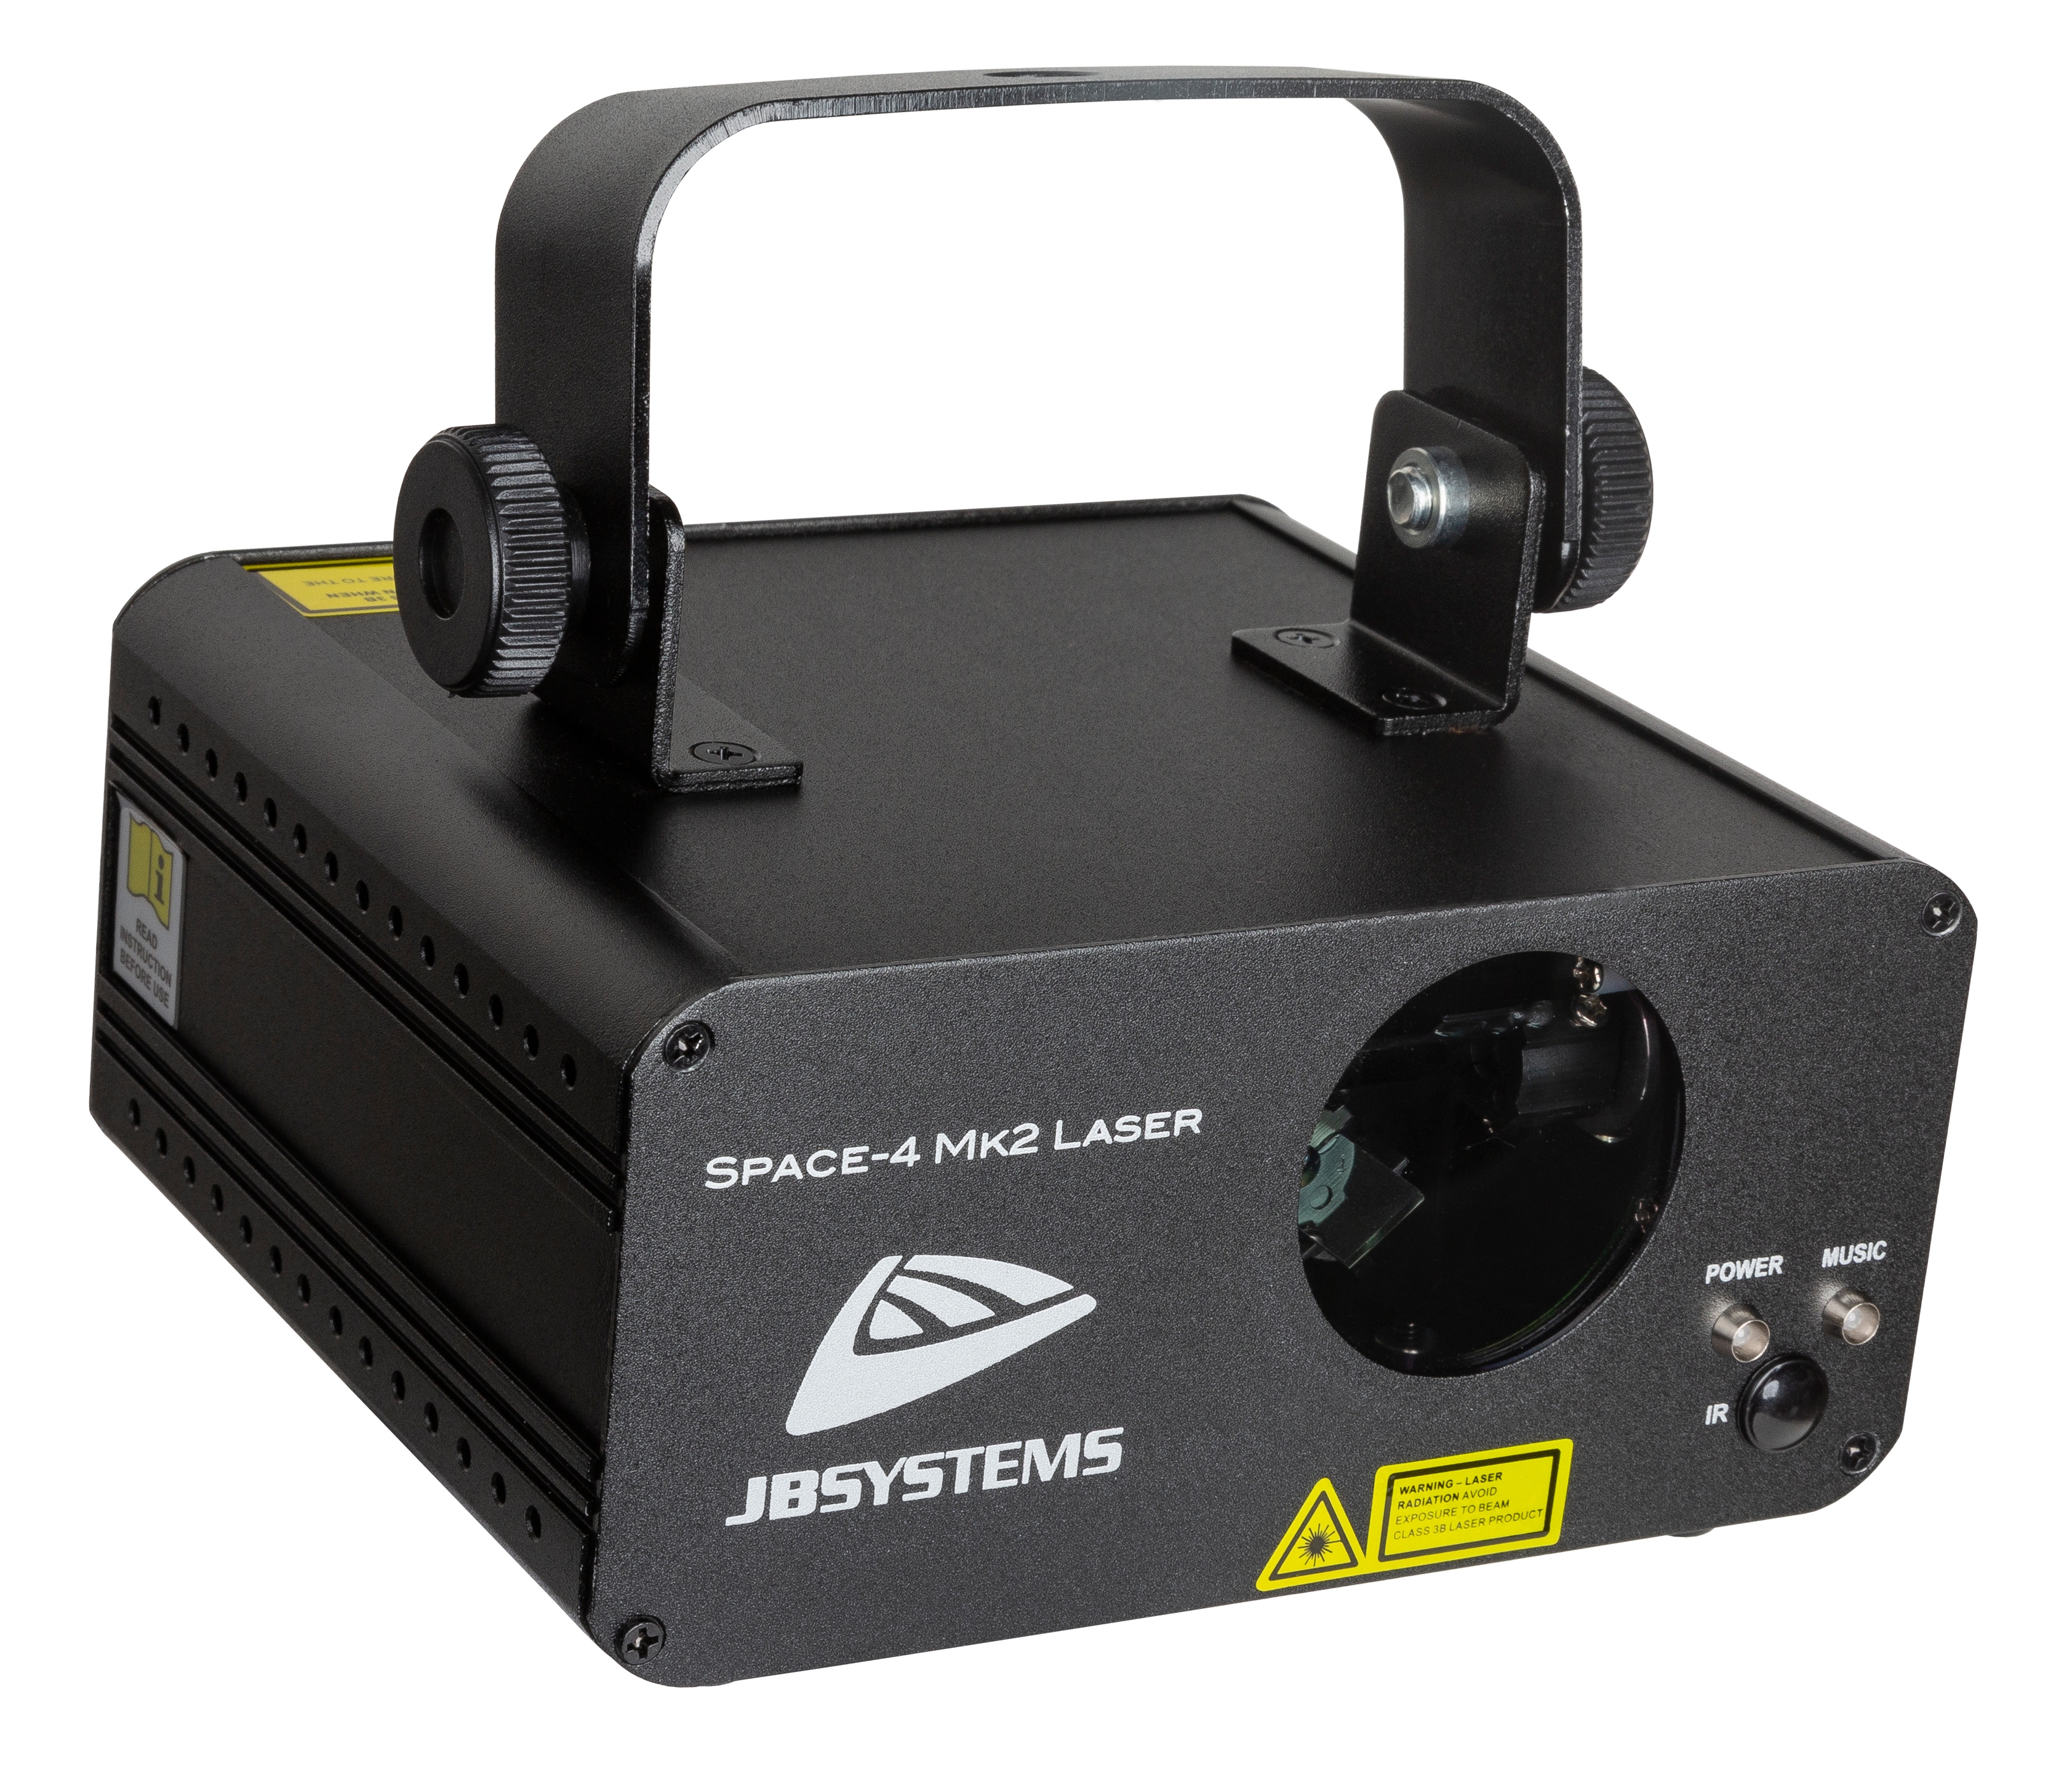 Safety of Class 2 visible-beam lasers